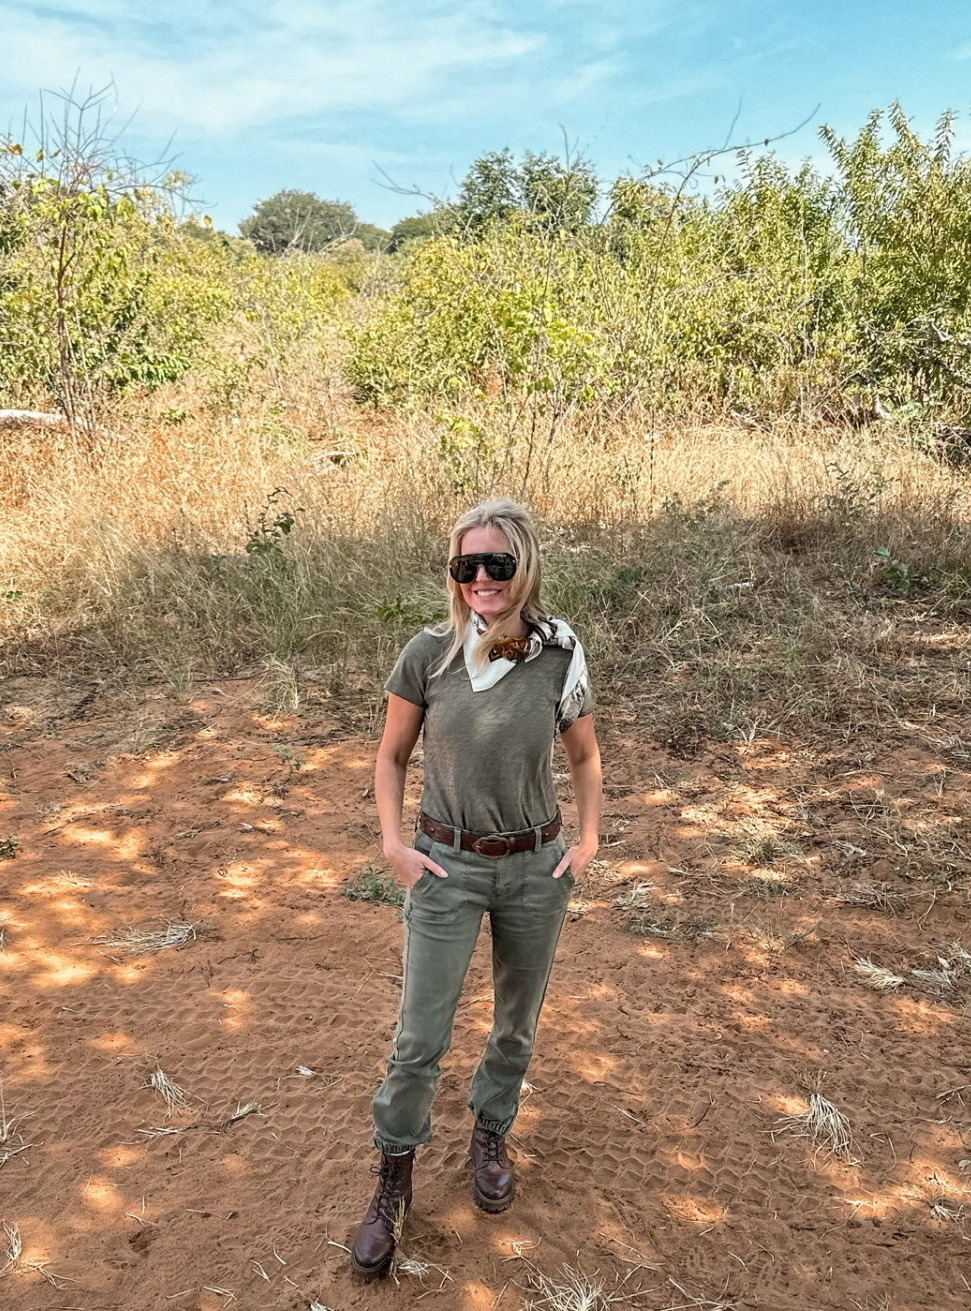 What to wear on an African safari